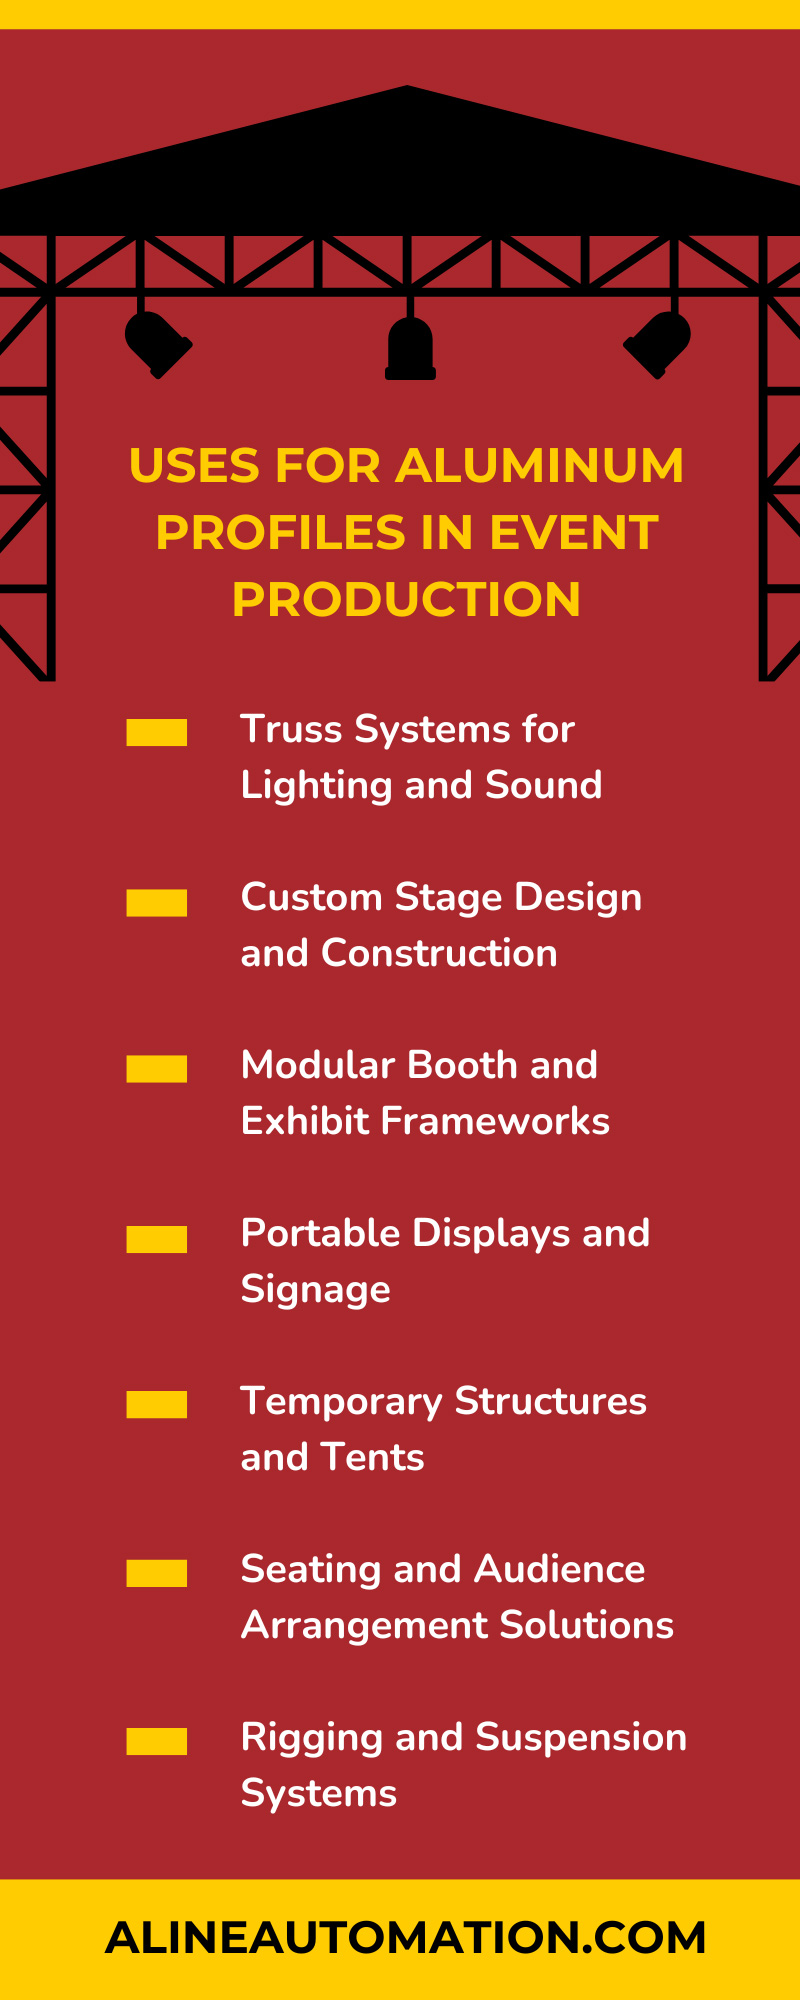 7 Uses for Aluminum Profiles in Event Production